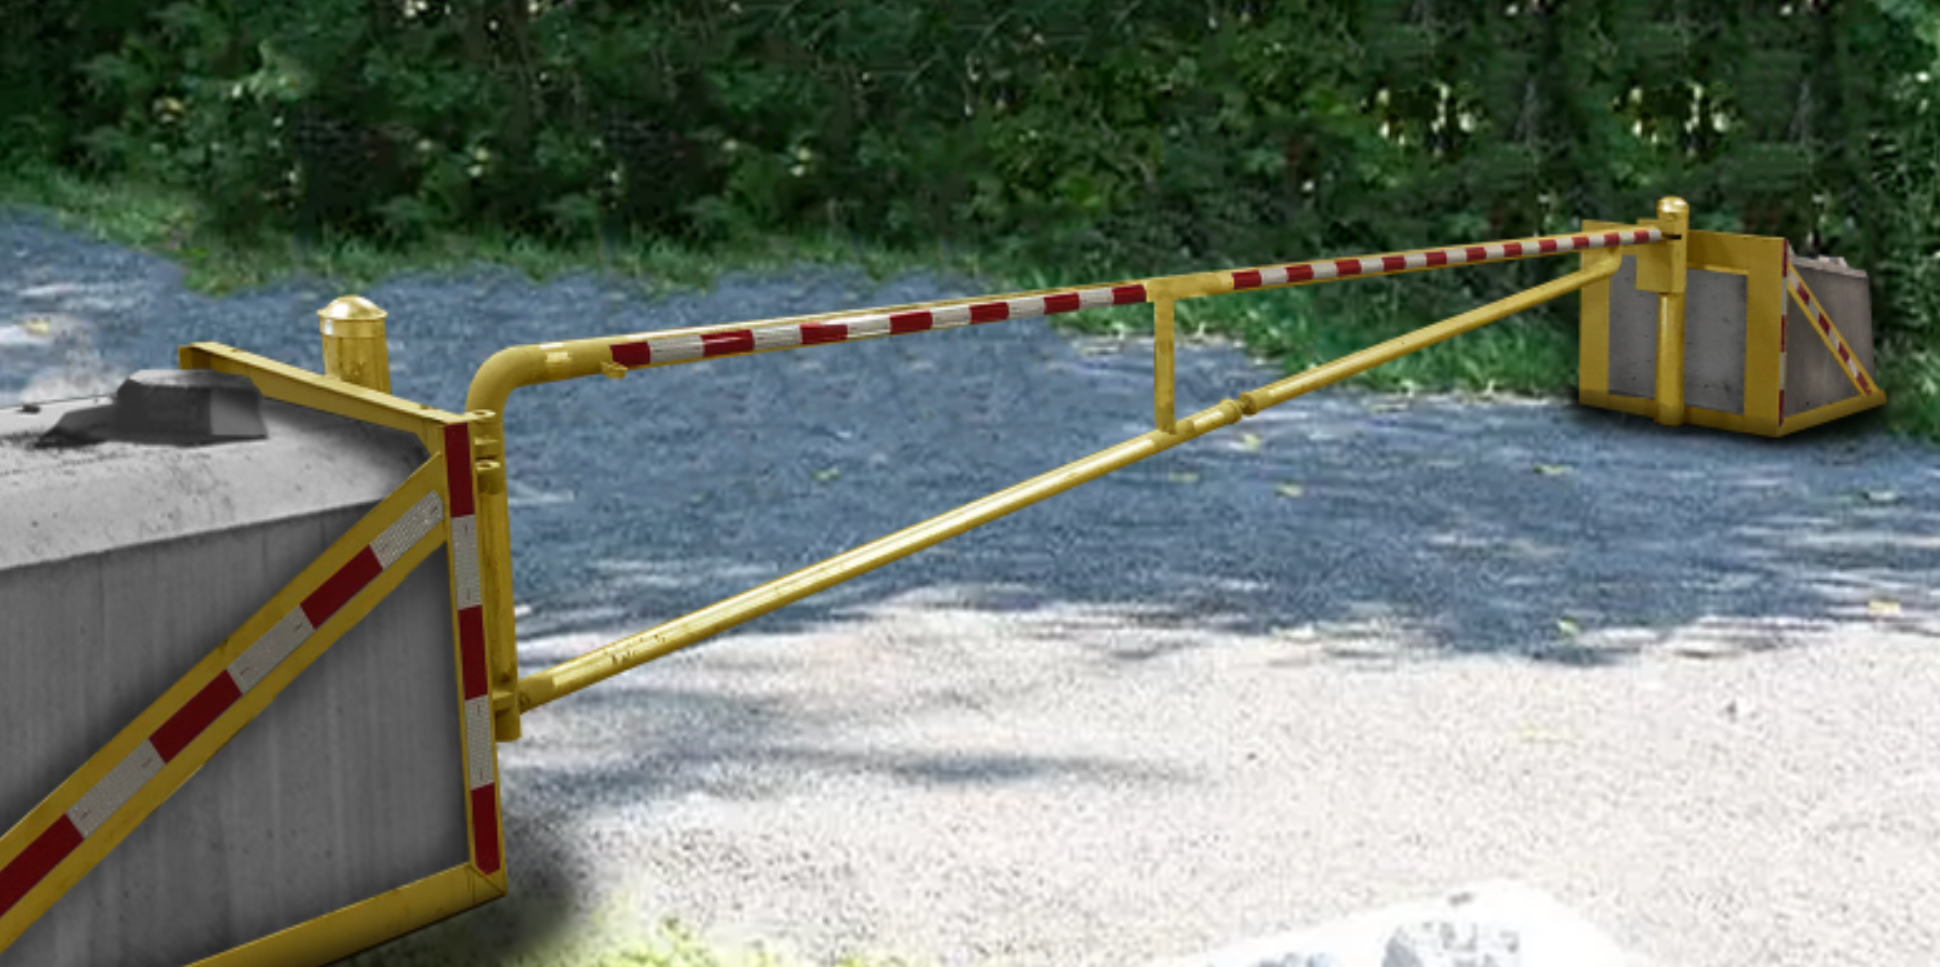 a yellow, red, and white vehicle gate closed across a gravel road